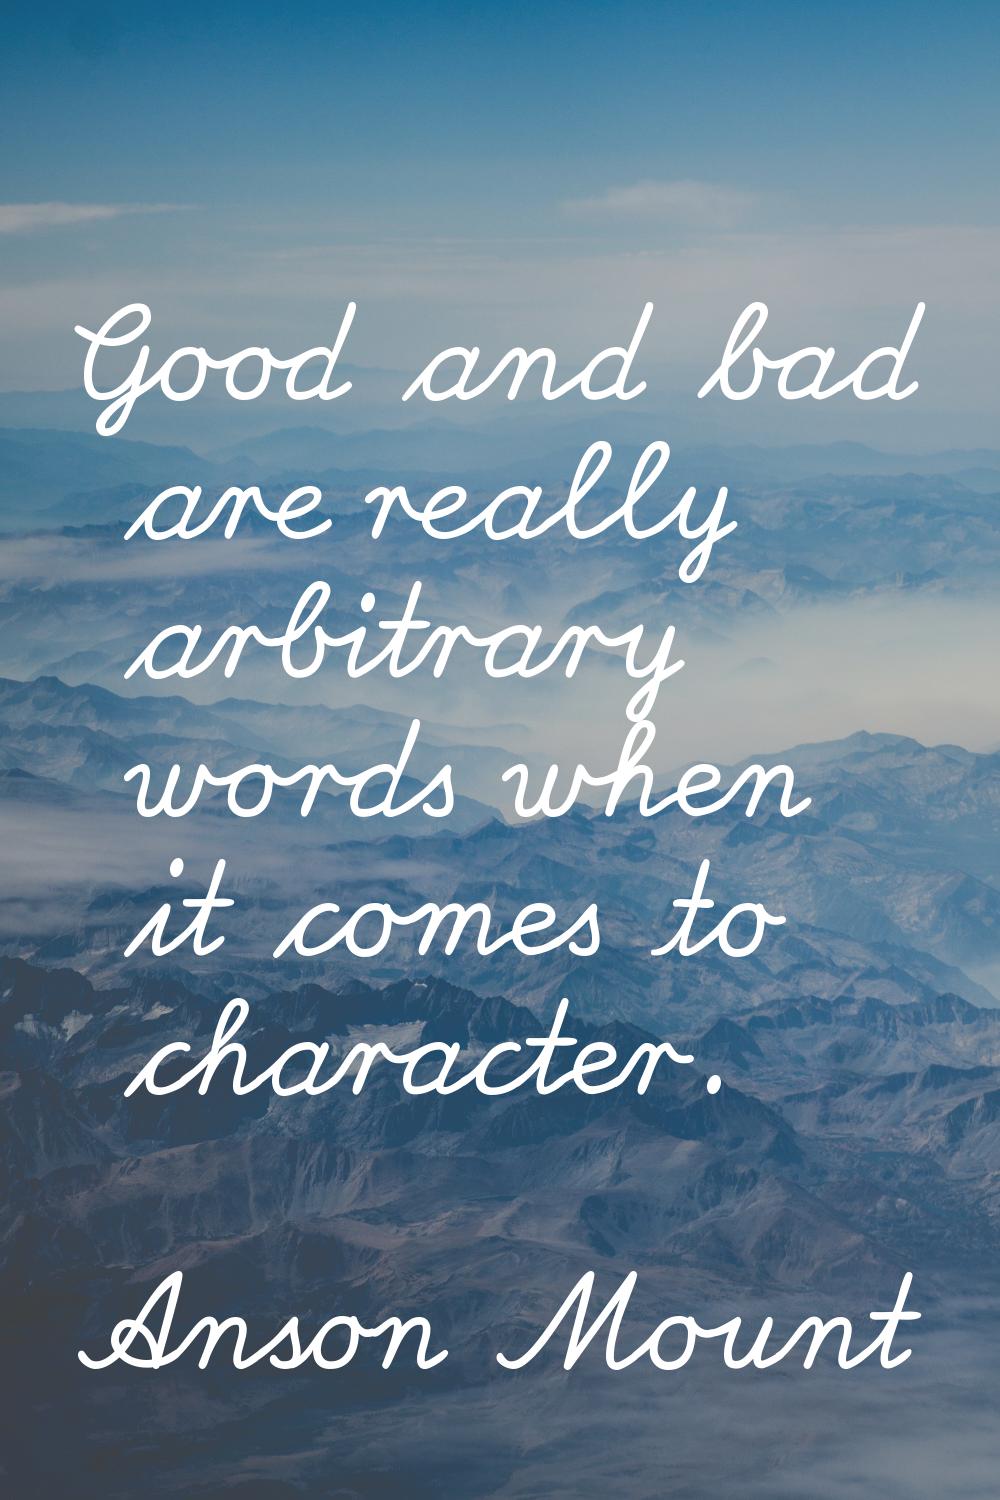 Good and bad are really arbitrary words when it comes to character.